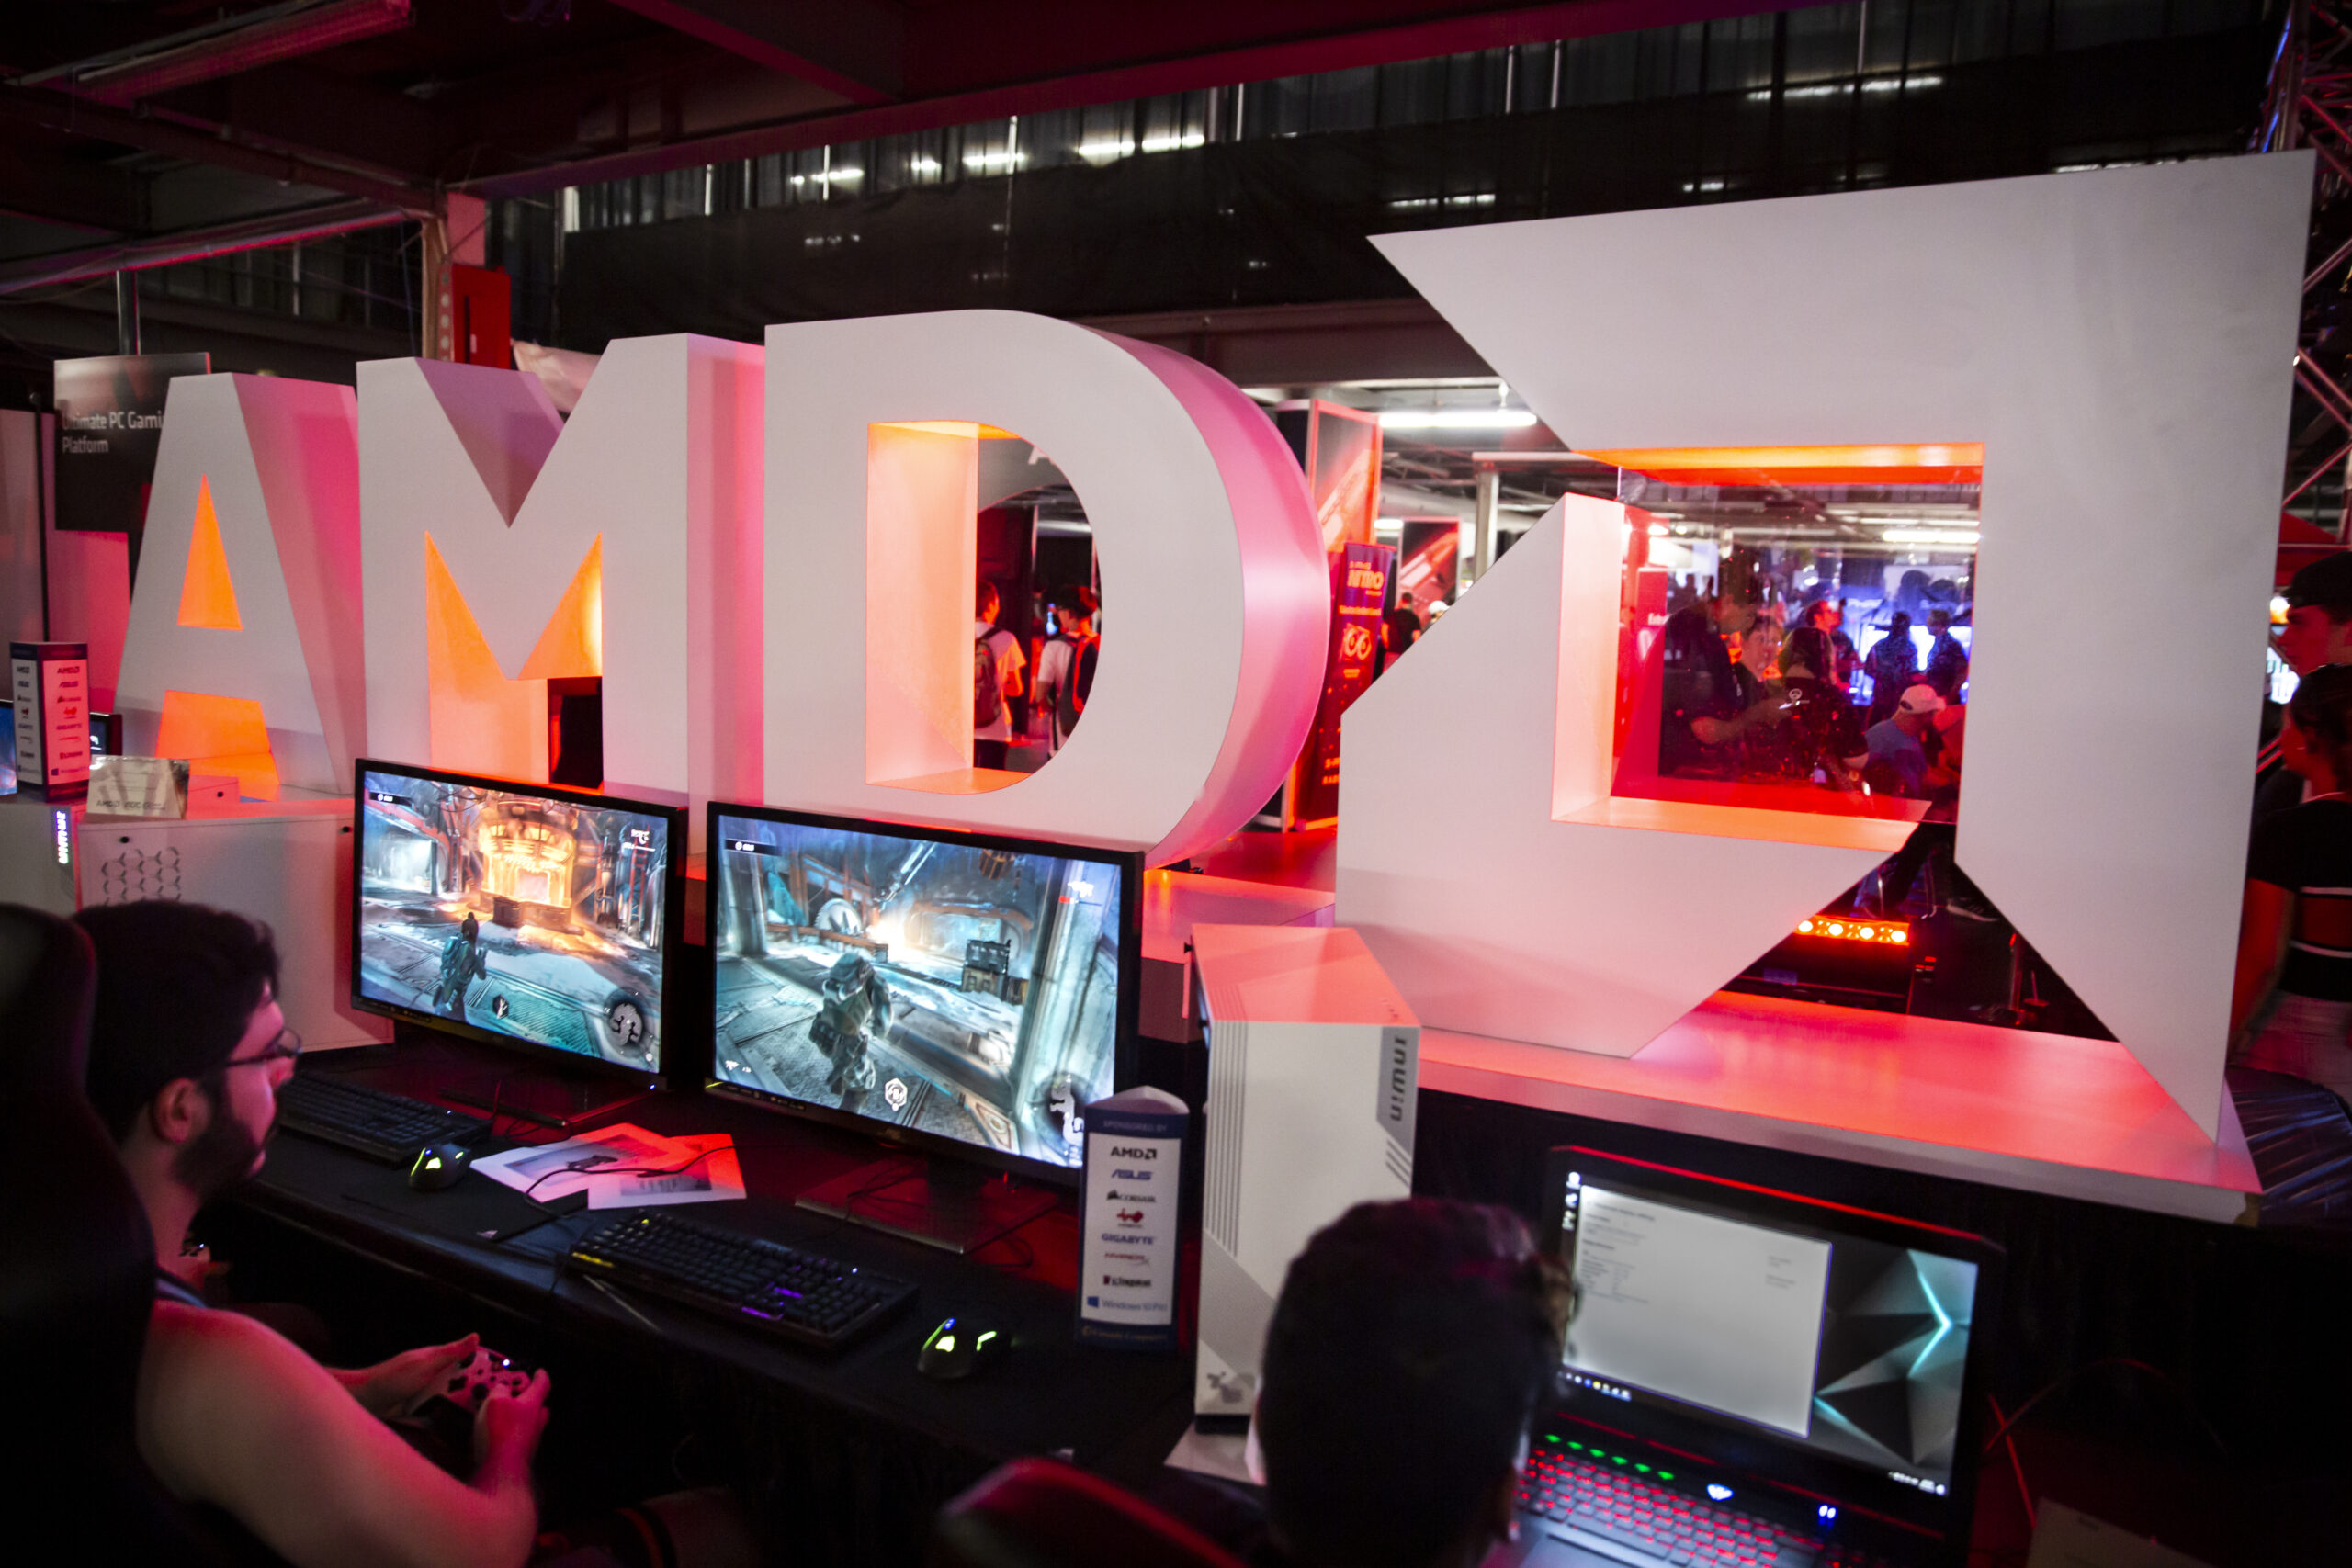 A man infront of two computer screens with AMD logo in the background in large letters